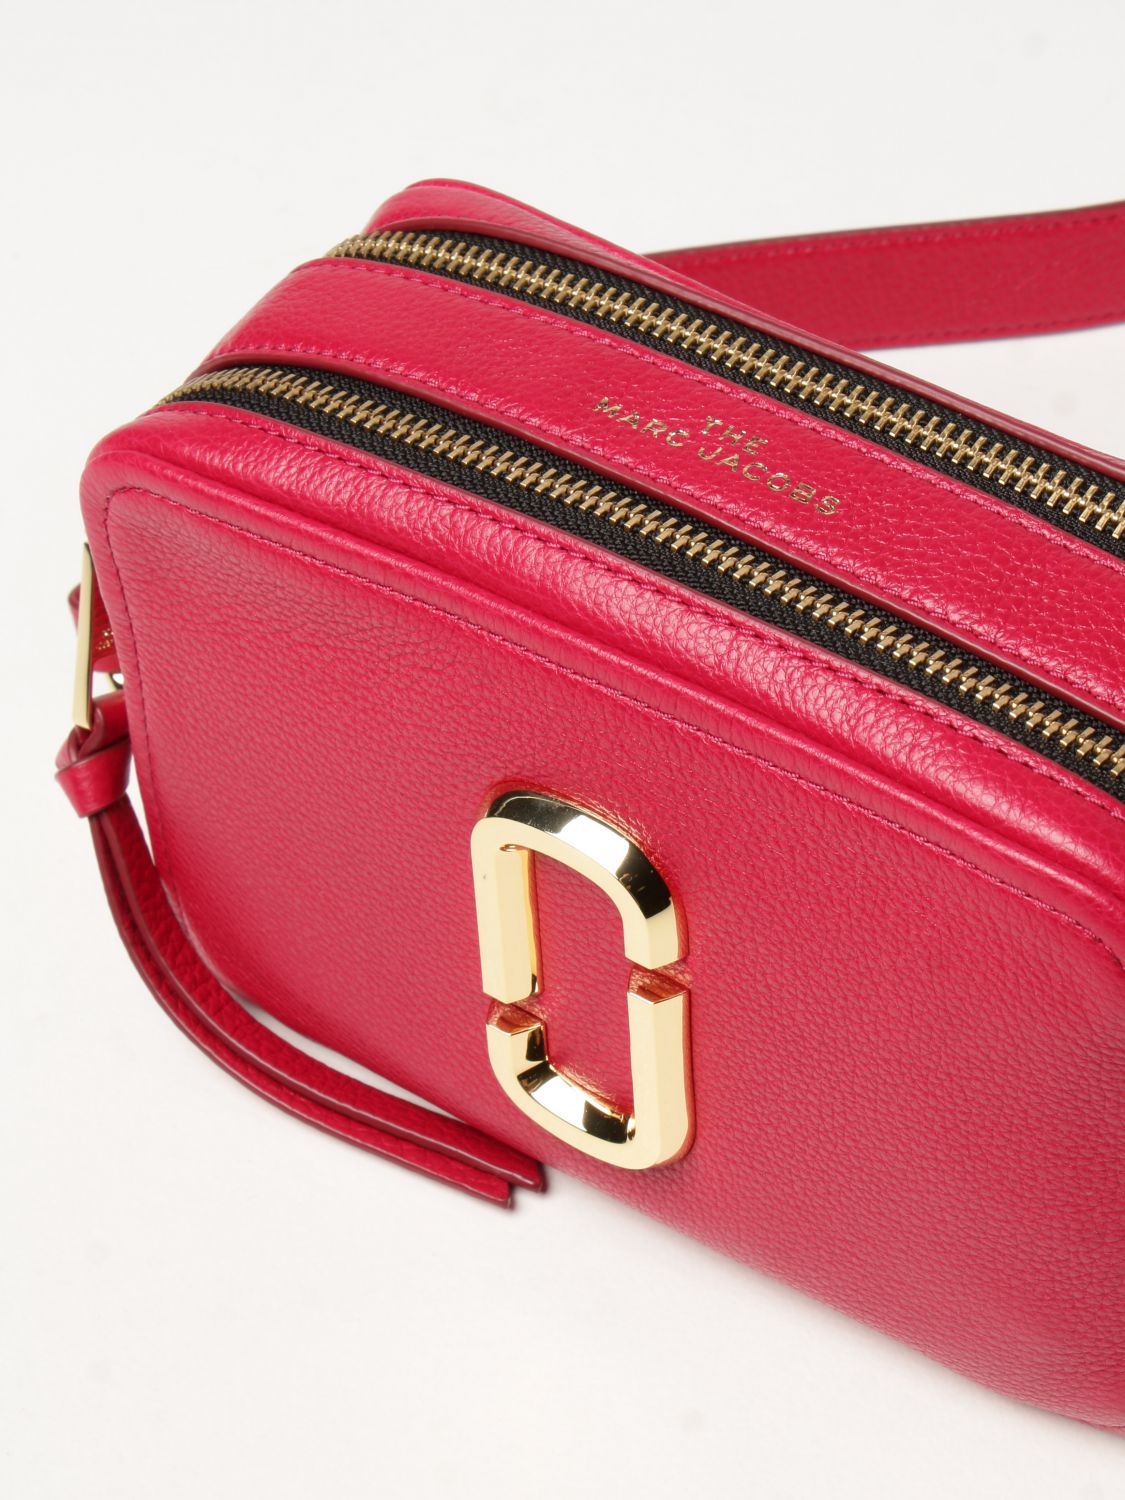 MARC JACOBS: The Softshot leather bag | Crossbody Bags Marc Jacobs